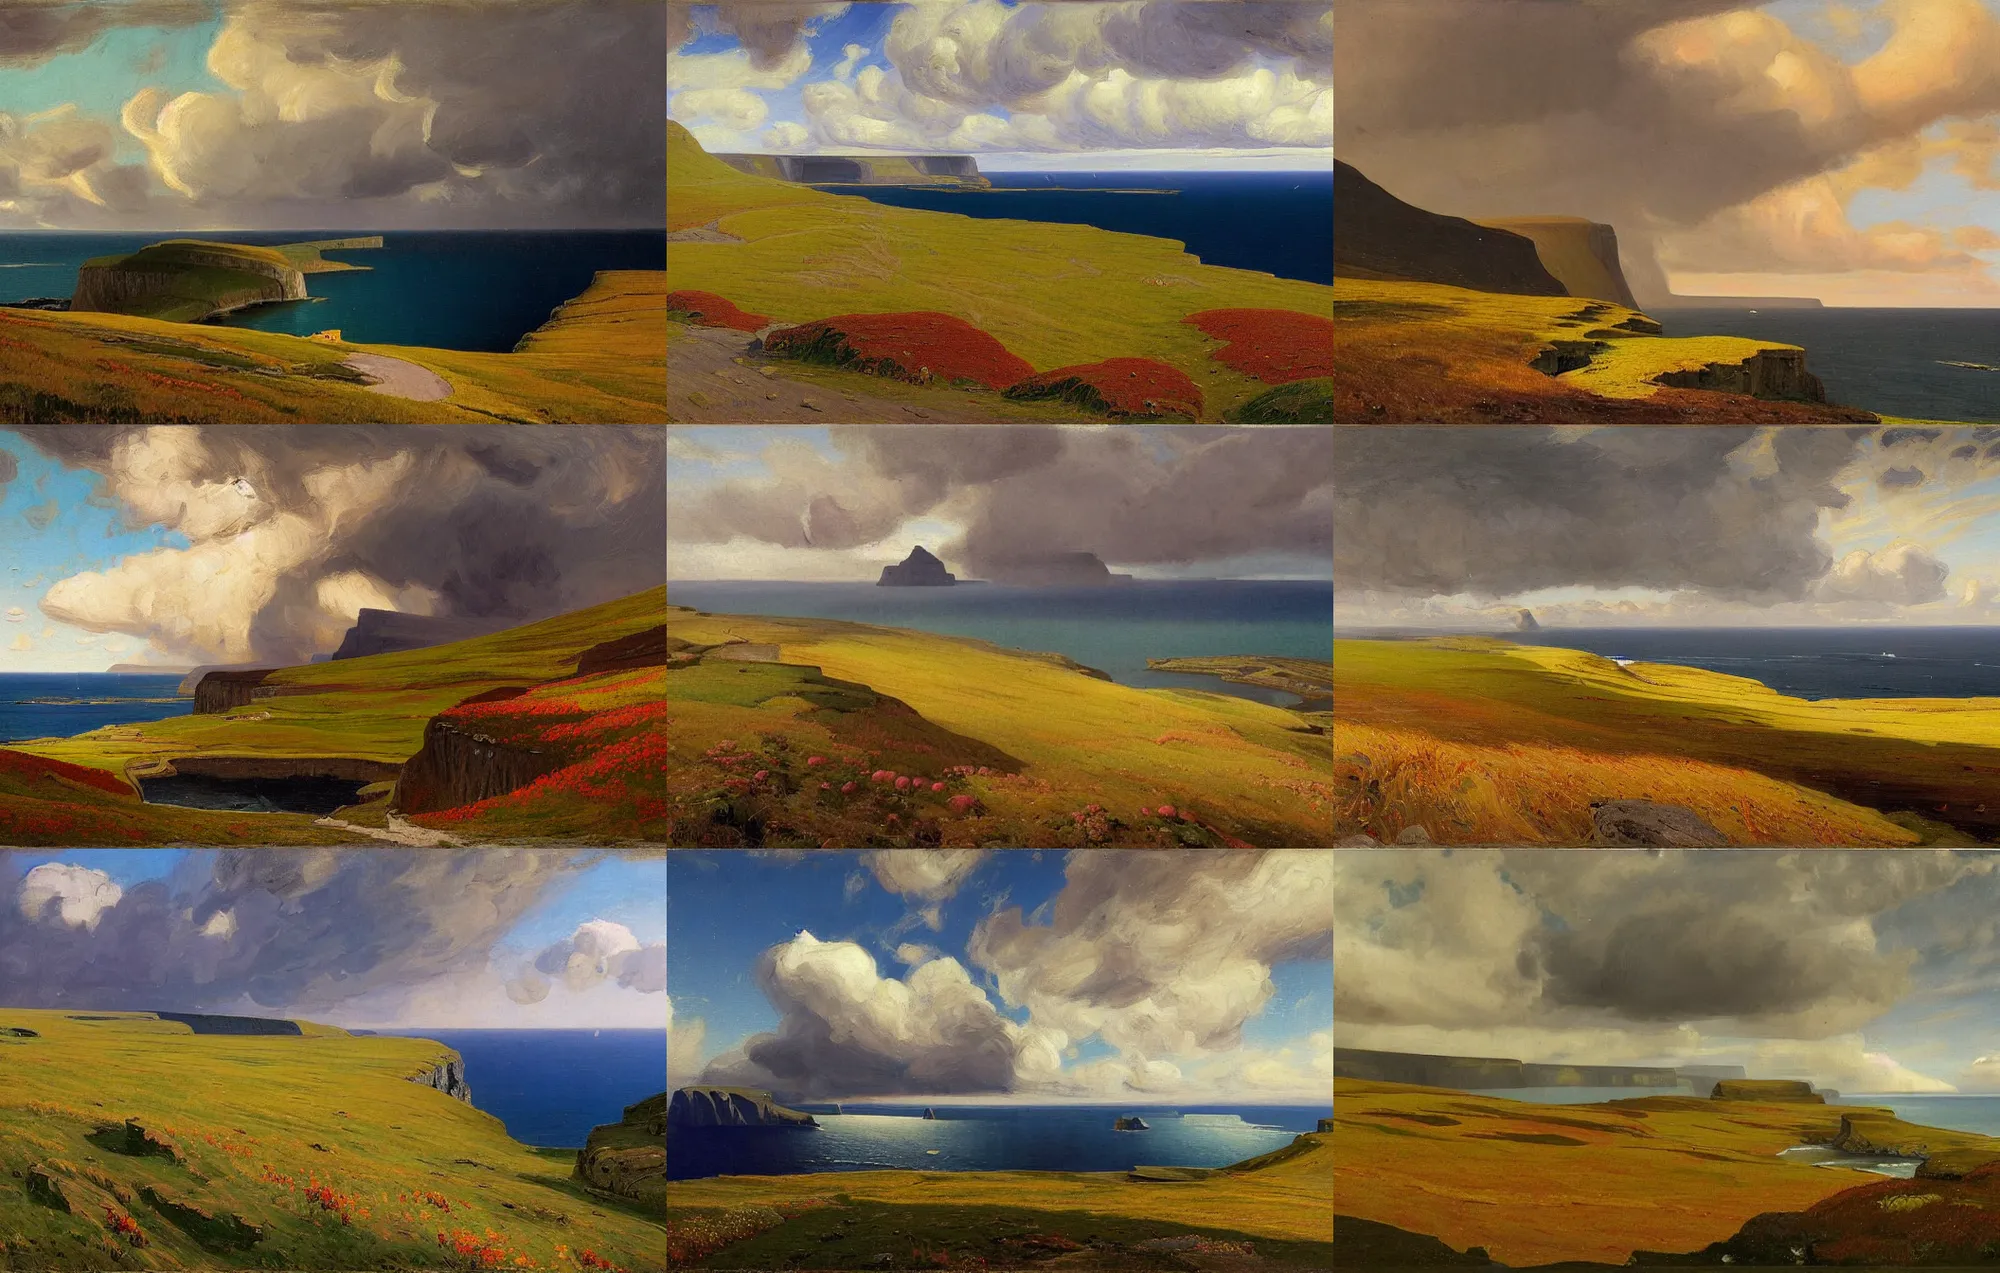 Prompt: painting of landscape of faroe island, cliffs and sea by frederick judd waugh, road between hills, surreal sky, environmental conept art, thunder clouds, sunset, forest, autumn, blossom wheat fields, river, pastoral, from a bird's eye view, unsaturated and dark atmosphere artwork by isaac levitan and alfred joseph casson and georgy nissky and nikolay dubovskoy and colley whisson